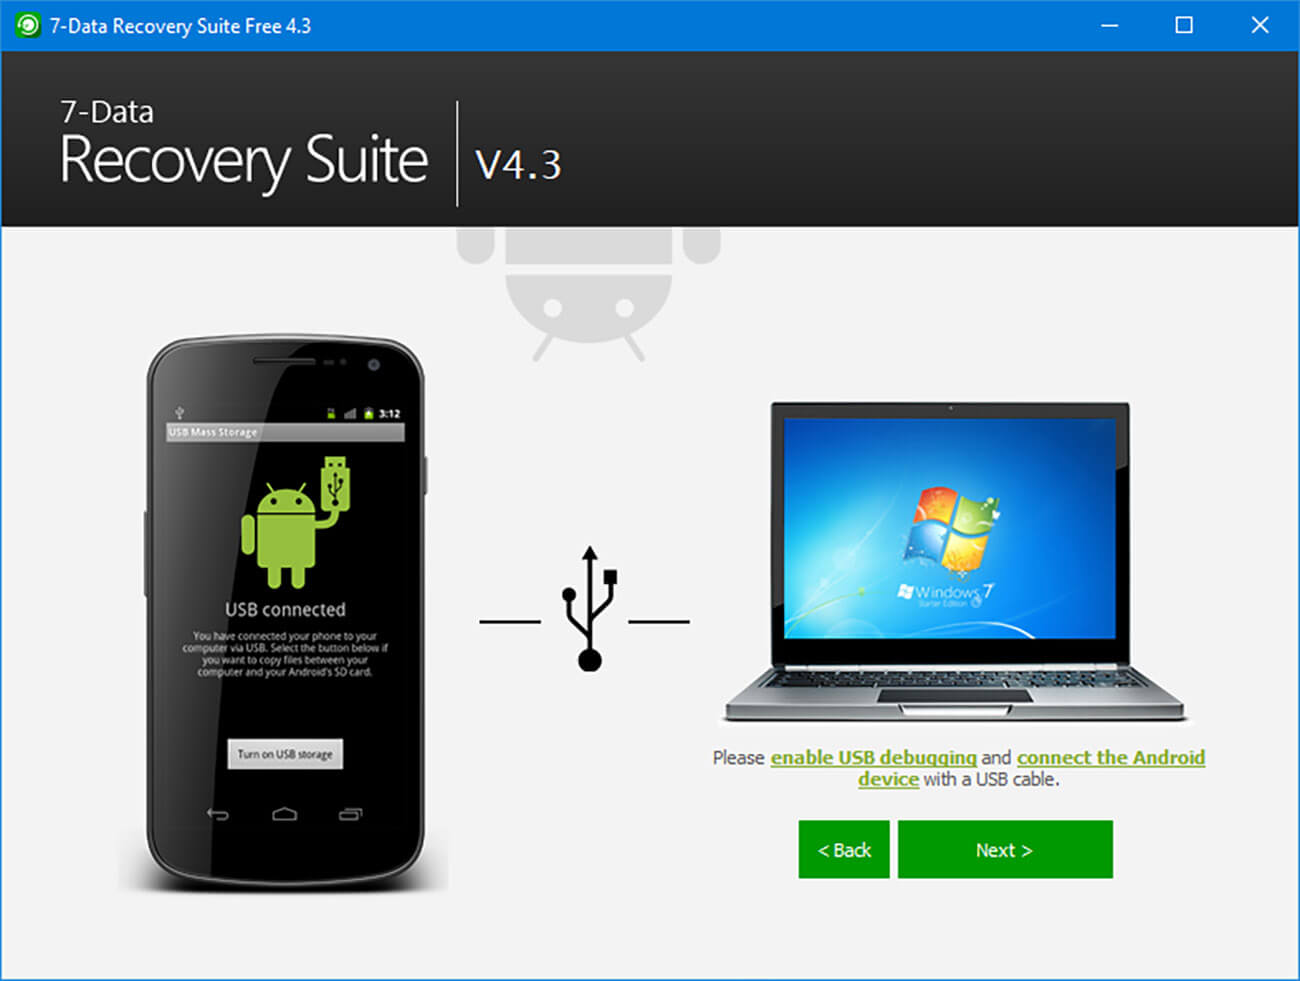 android data recovery pro free